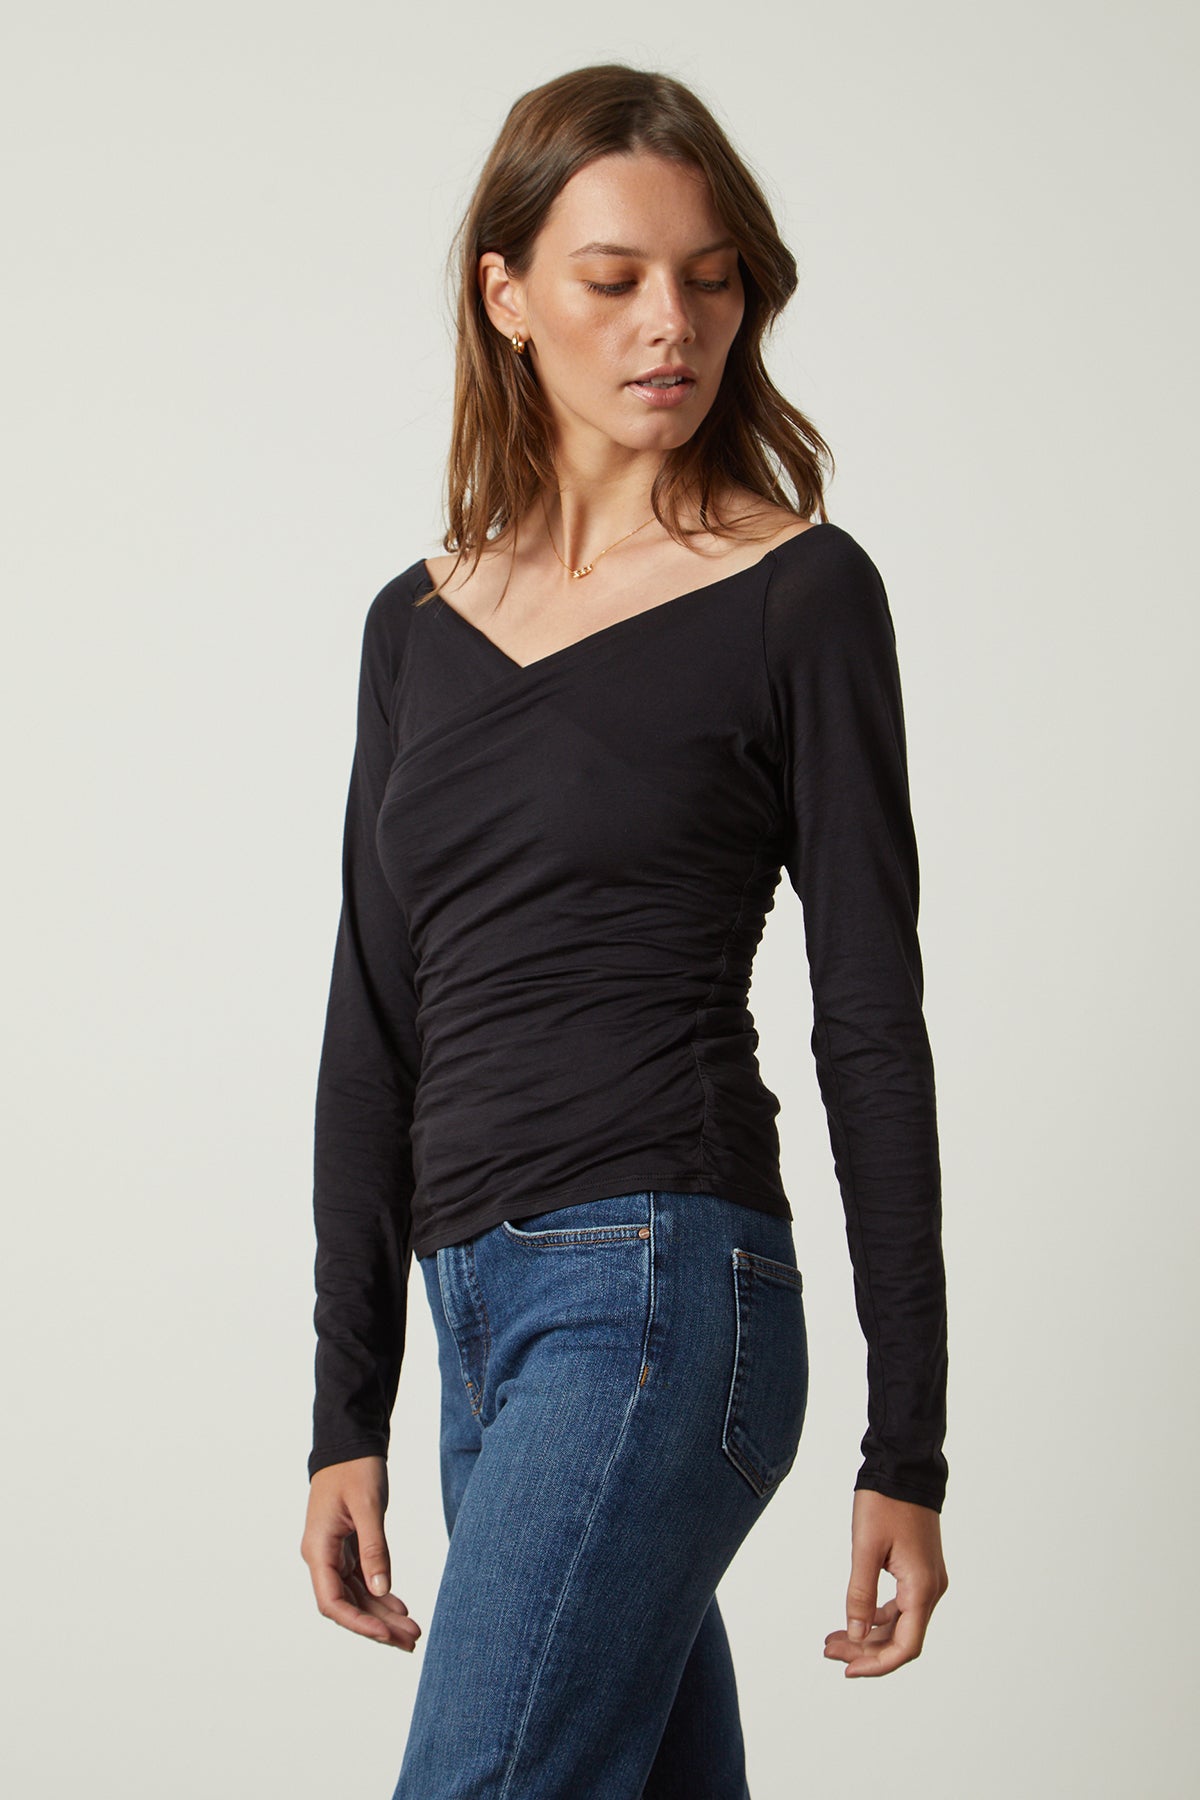 Tabbie Shirred Fitted Tee in black with blue denim front & side-25548612010177